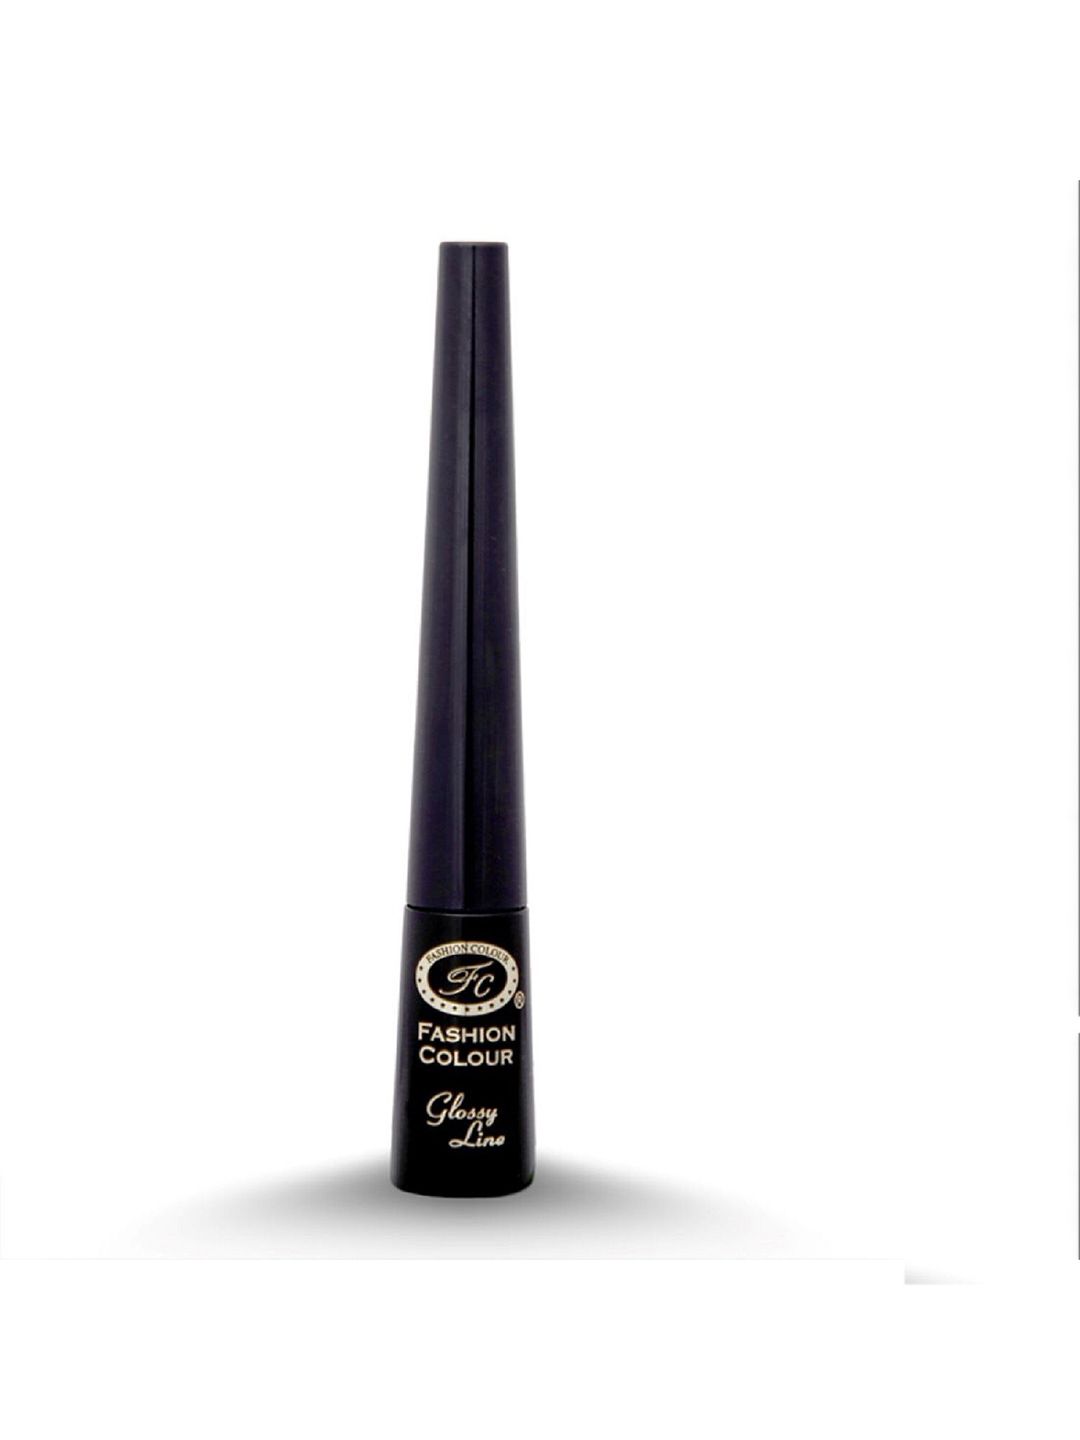 Fashion Colour Glossy Line 24 H One Touch Eyeliner 2.5 ml - Shiny Black Price in India